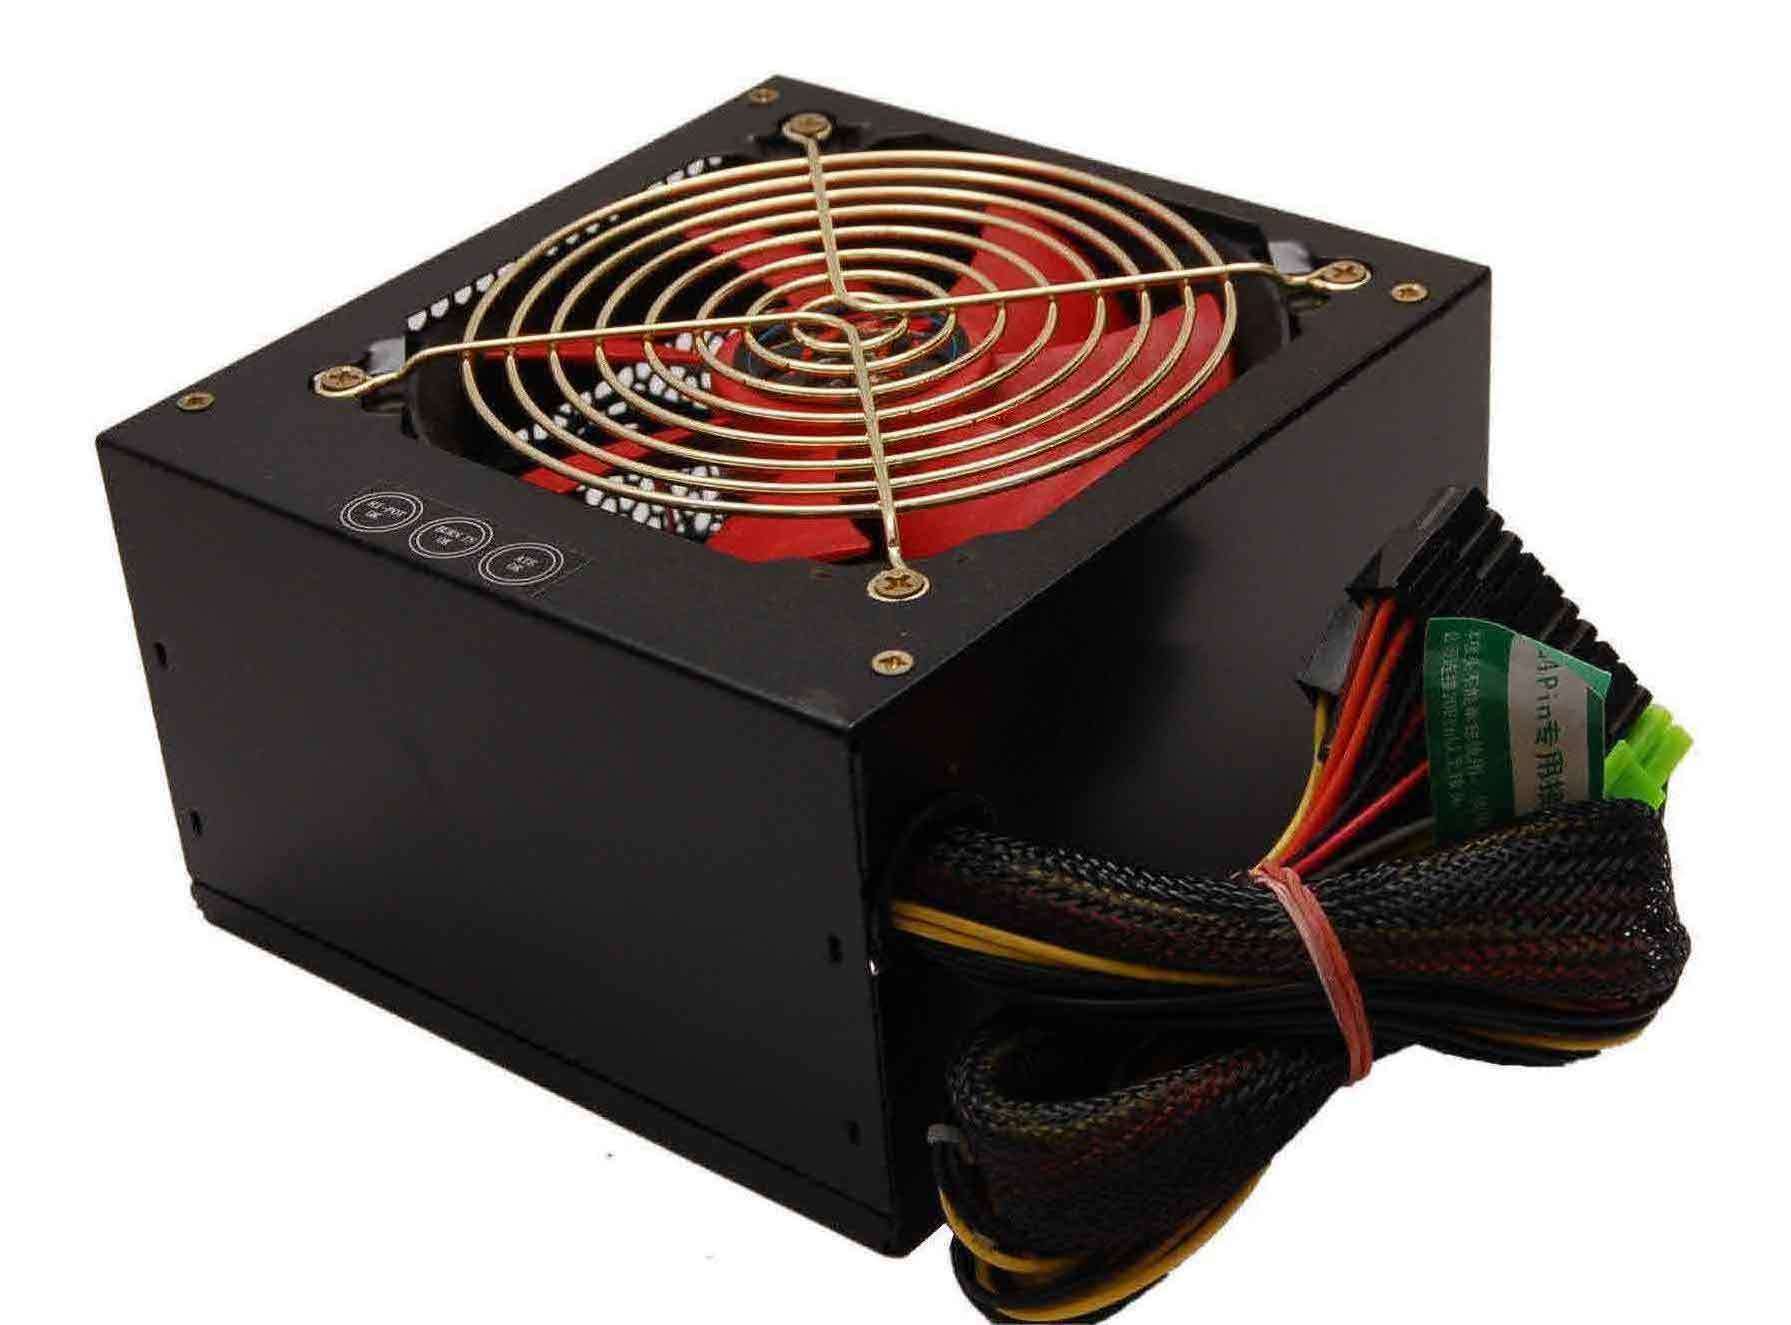 The best power supply models for a computer in 2022